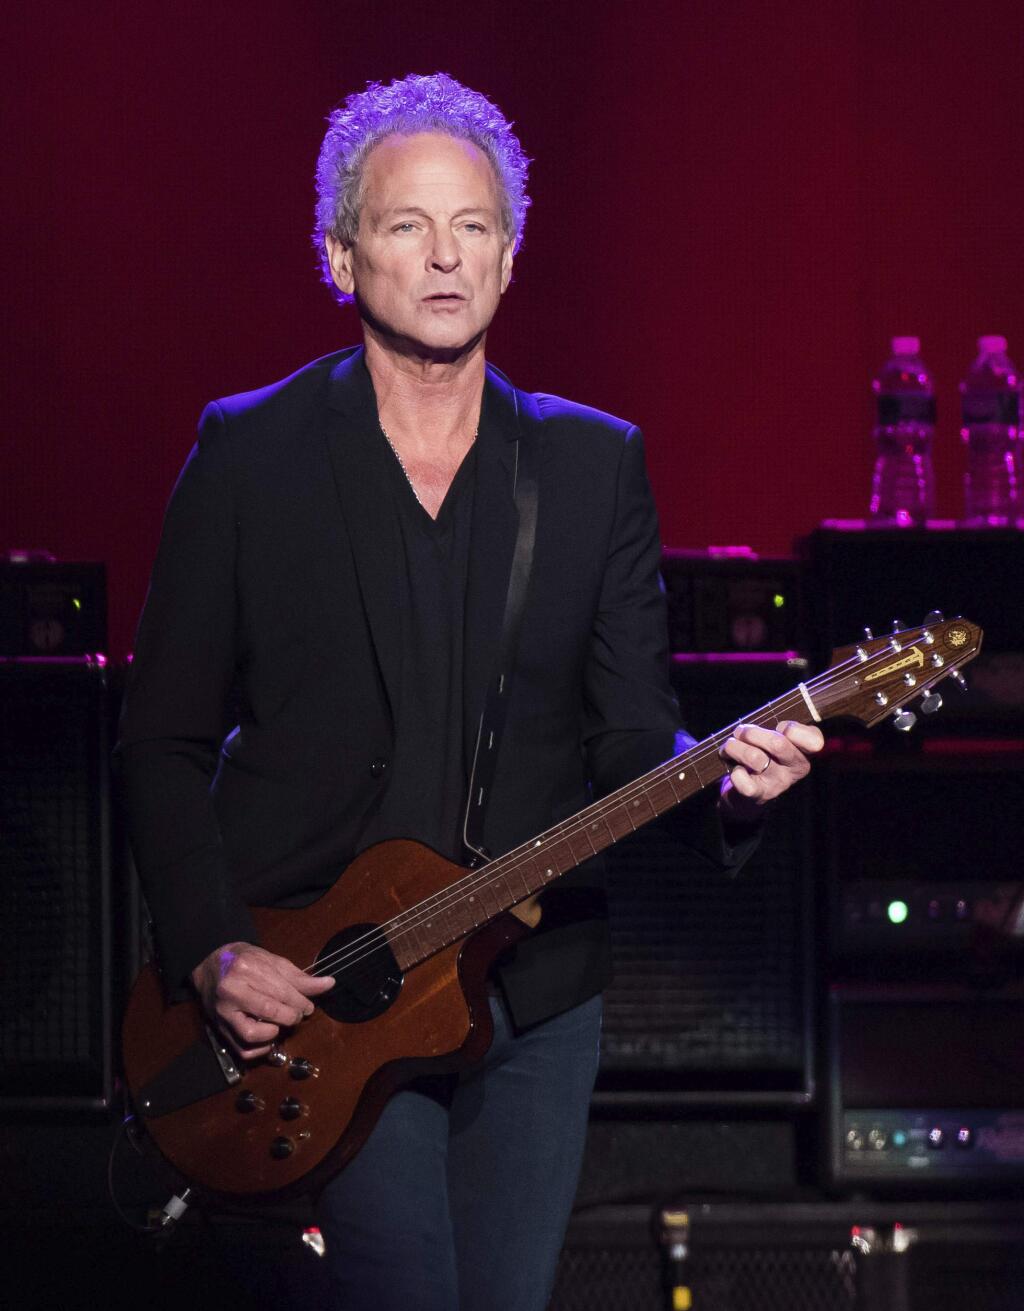 FILE - In this Oct. 6, 2014 file photo, Lindsey Buckingham from the band Fleetwood Mac performs at Madison Square Garden in New York. The band said in a statement Monday that Buckingham is out of the band for its upcoming tour. Buckingham left the group once before, from 1987 to 1996. He‚Äôll be jointly replaced by Neil Finn of Crowded House and Mike Campbell of Tom Petty and the Heartbreakers. (Photo by Charles Sykes/Invision/AP, FIle)